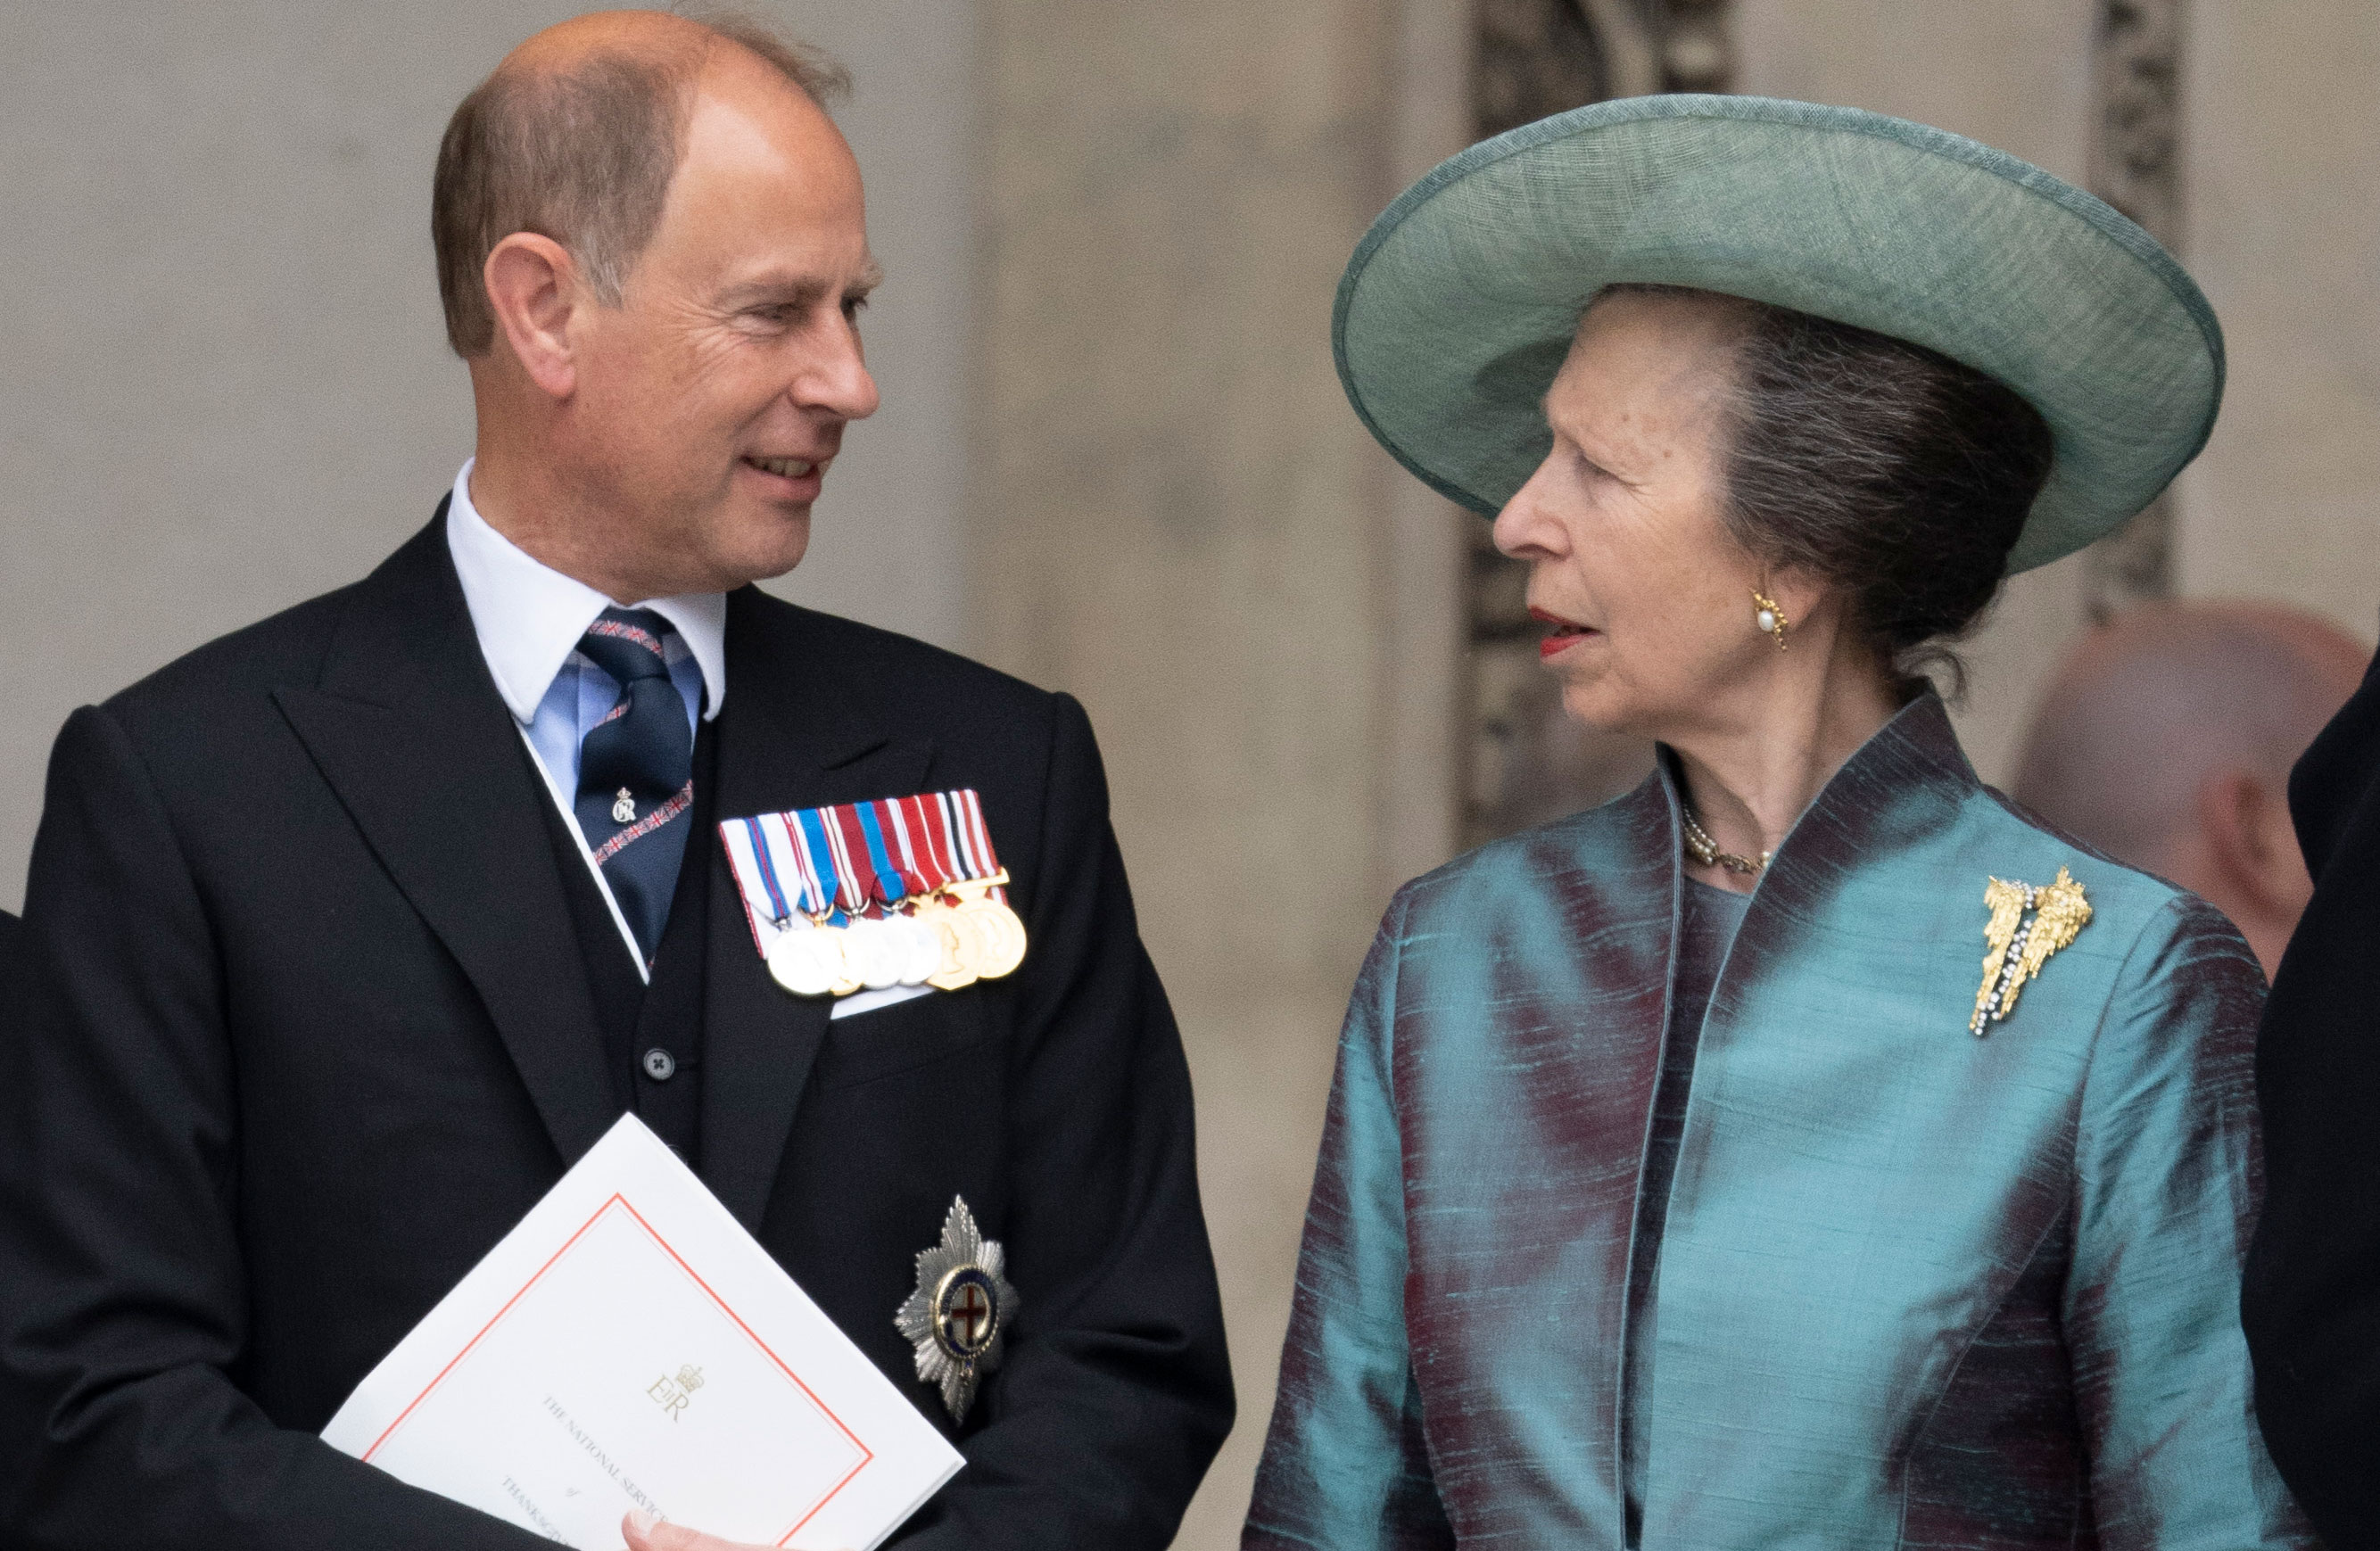 Prince Edward, Earl of Wessex and Princess Anne are seen together in June in London.